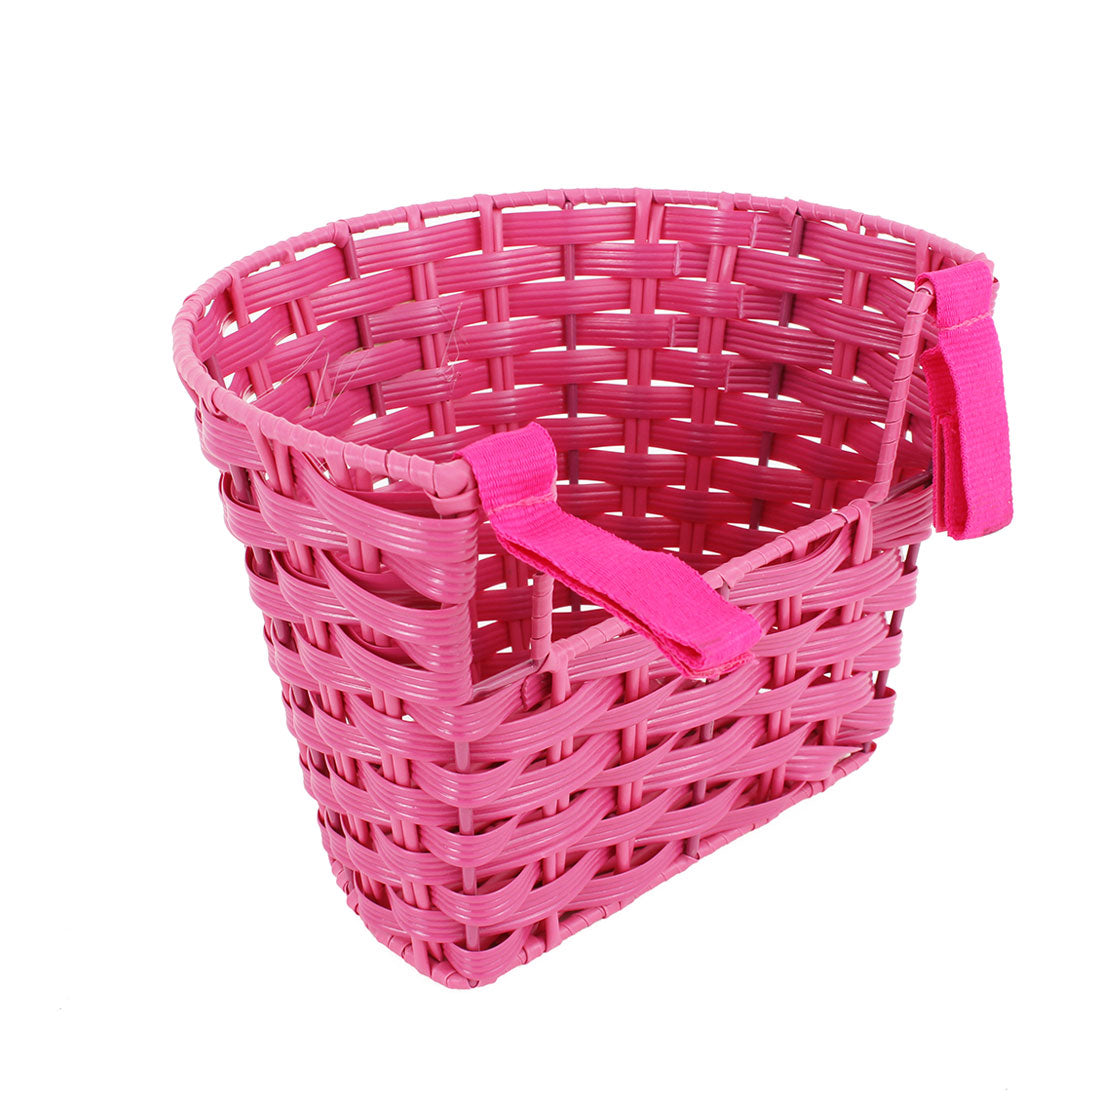 Micro Scooter Basket - Pink Scooter Accessories